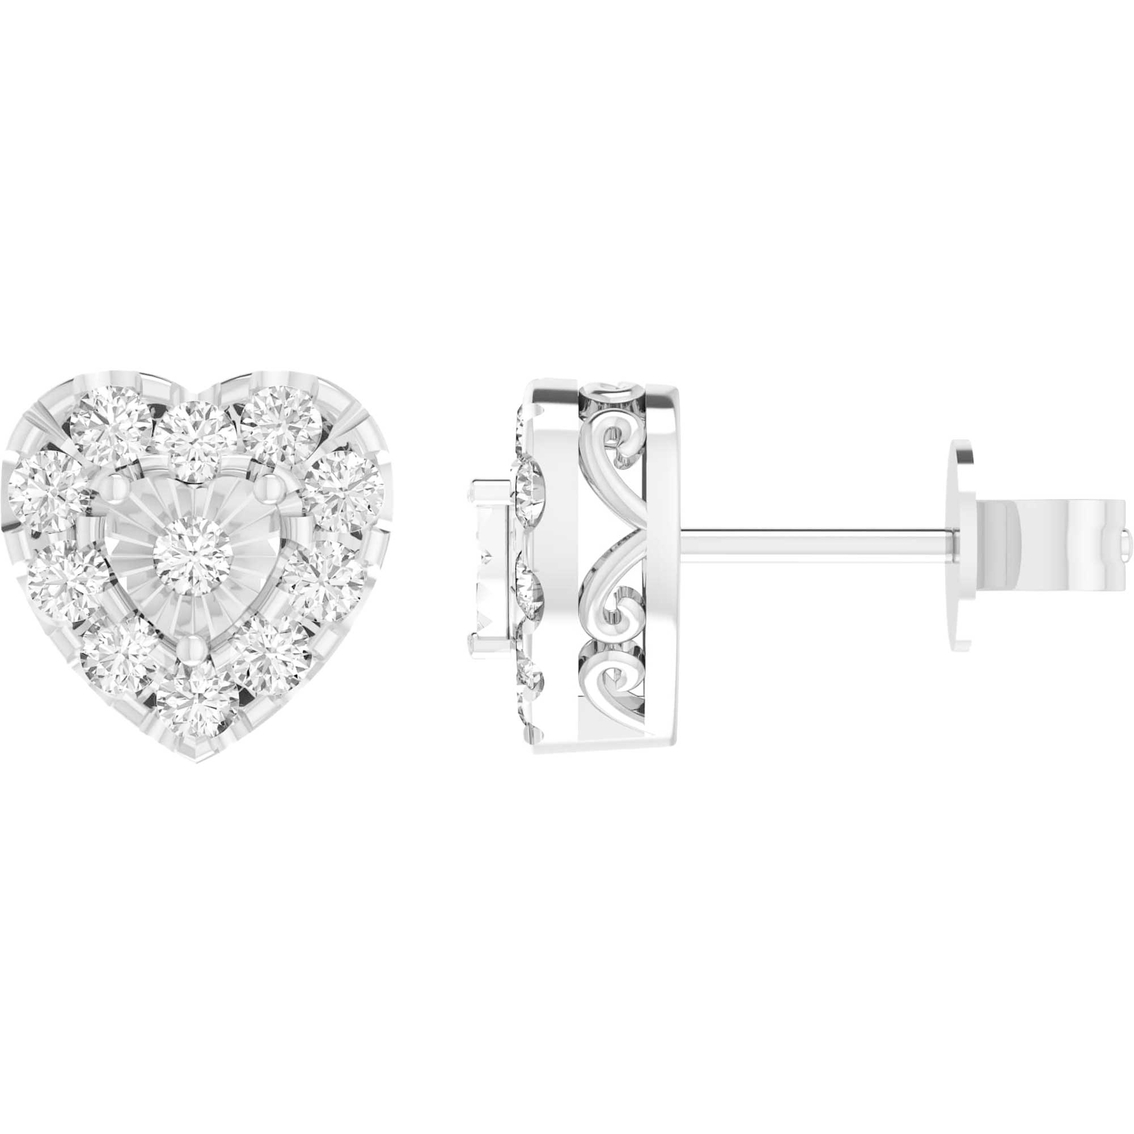 Sterling Silver 1 CTW Diamond Pendant and Earring Set - Image 4 of 5